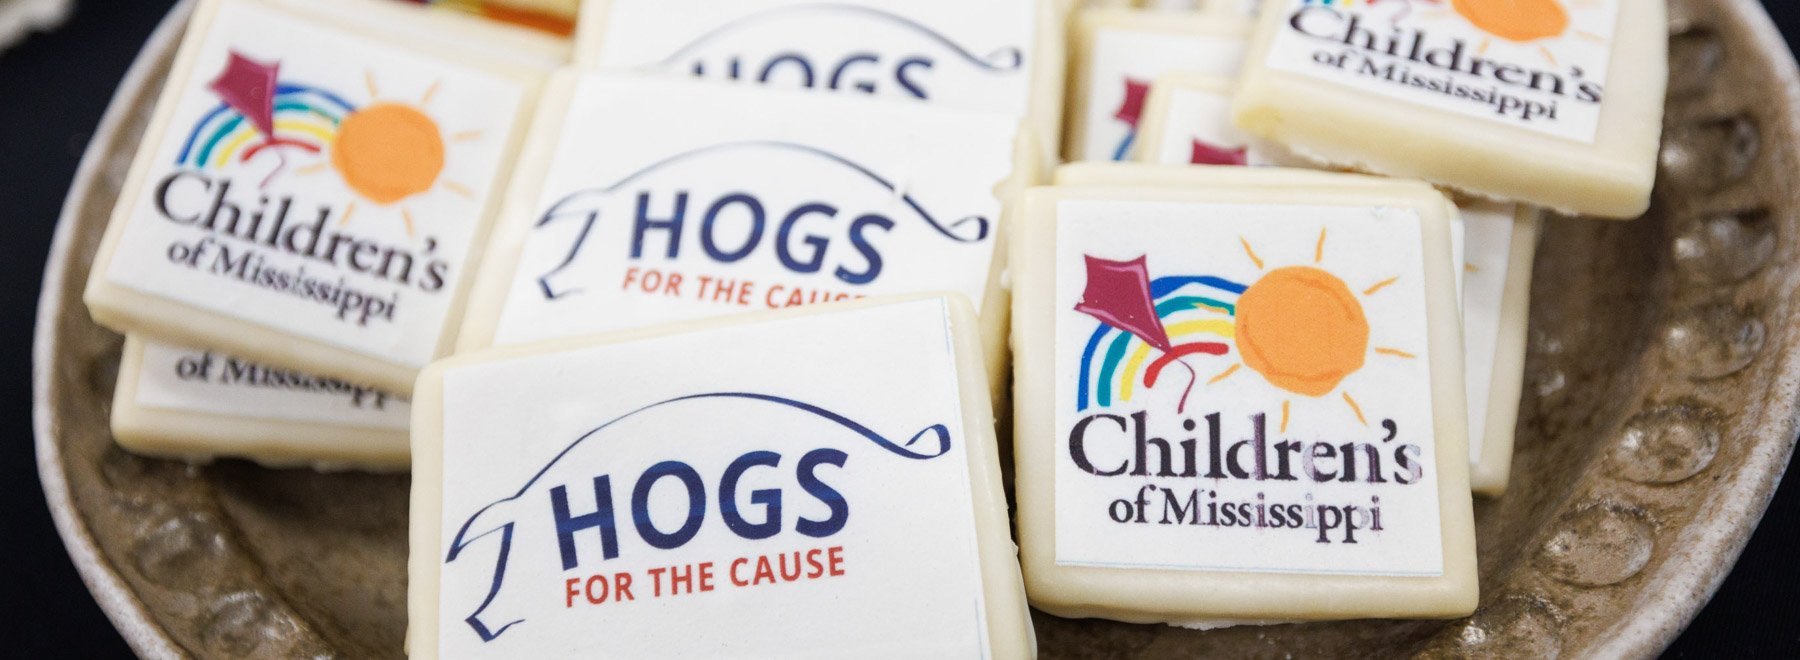 Cookies featured the logos of Hogs for the Cause and Children's of Mississippi.